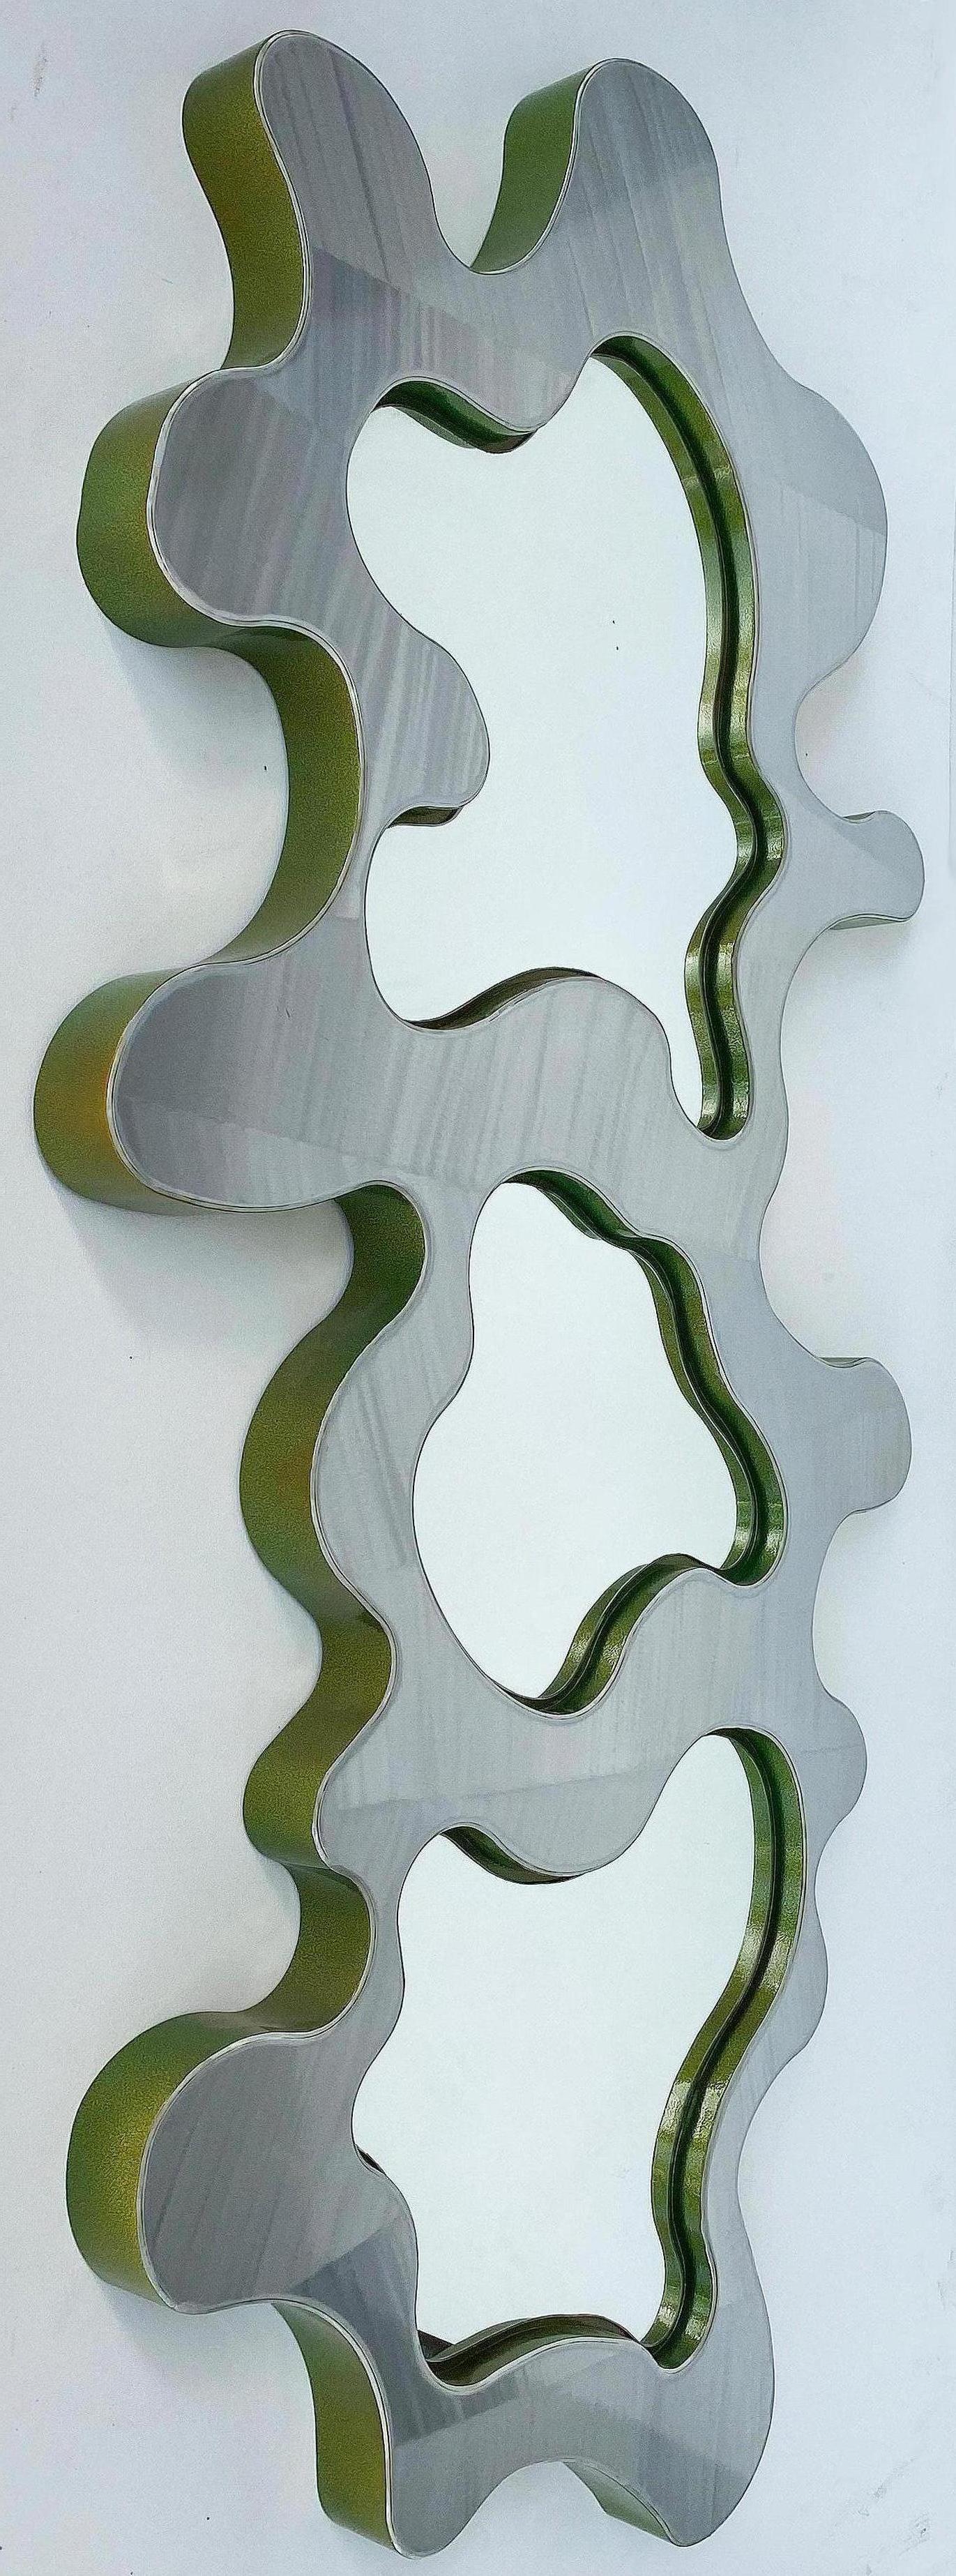 Offered for sale is a Bert Furnari powder-coated three-panel aluminum mirror. The mirror has a polished surface with sides that are powder-coated in an avocado green finish. Bert Furnari (b.1968) works out of Easton, PA where he has his